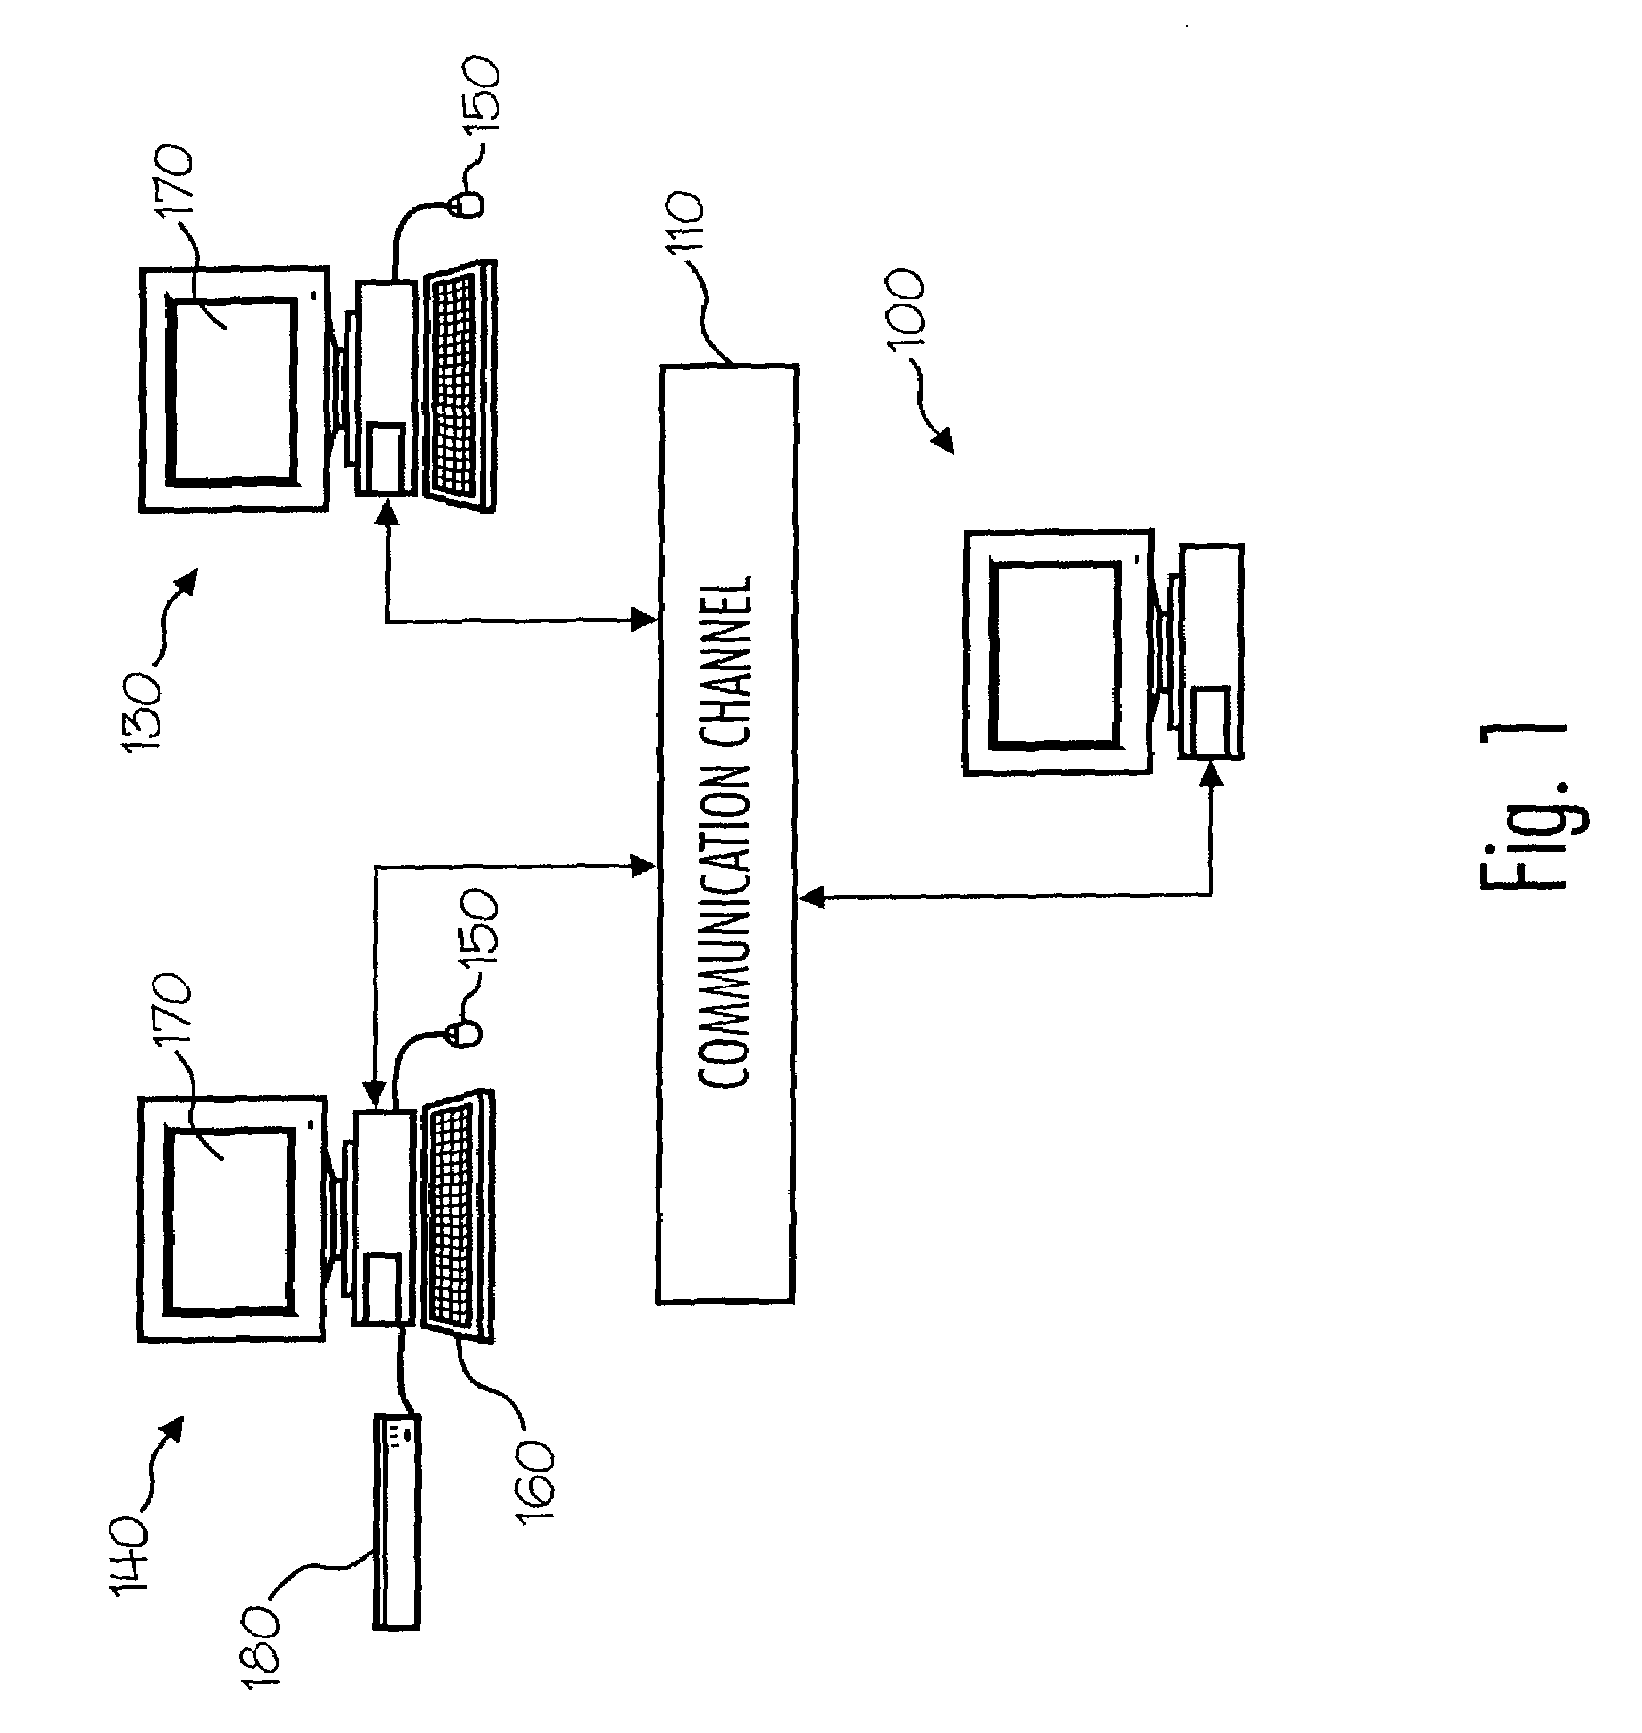 System and method for facilitating the handling of a dispute using disparate architectures